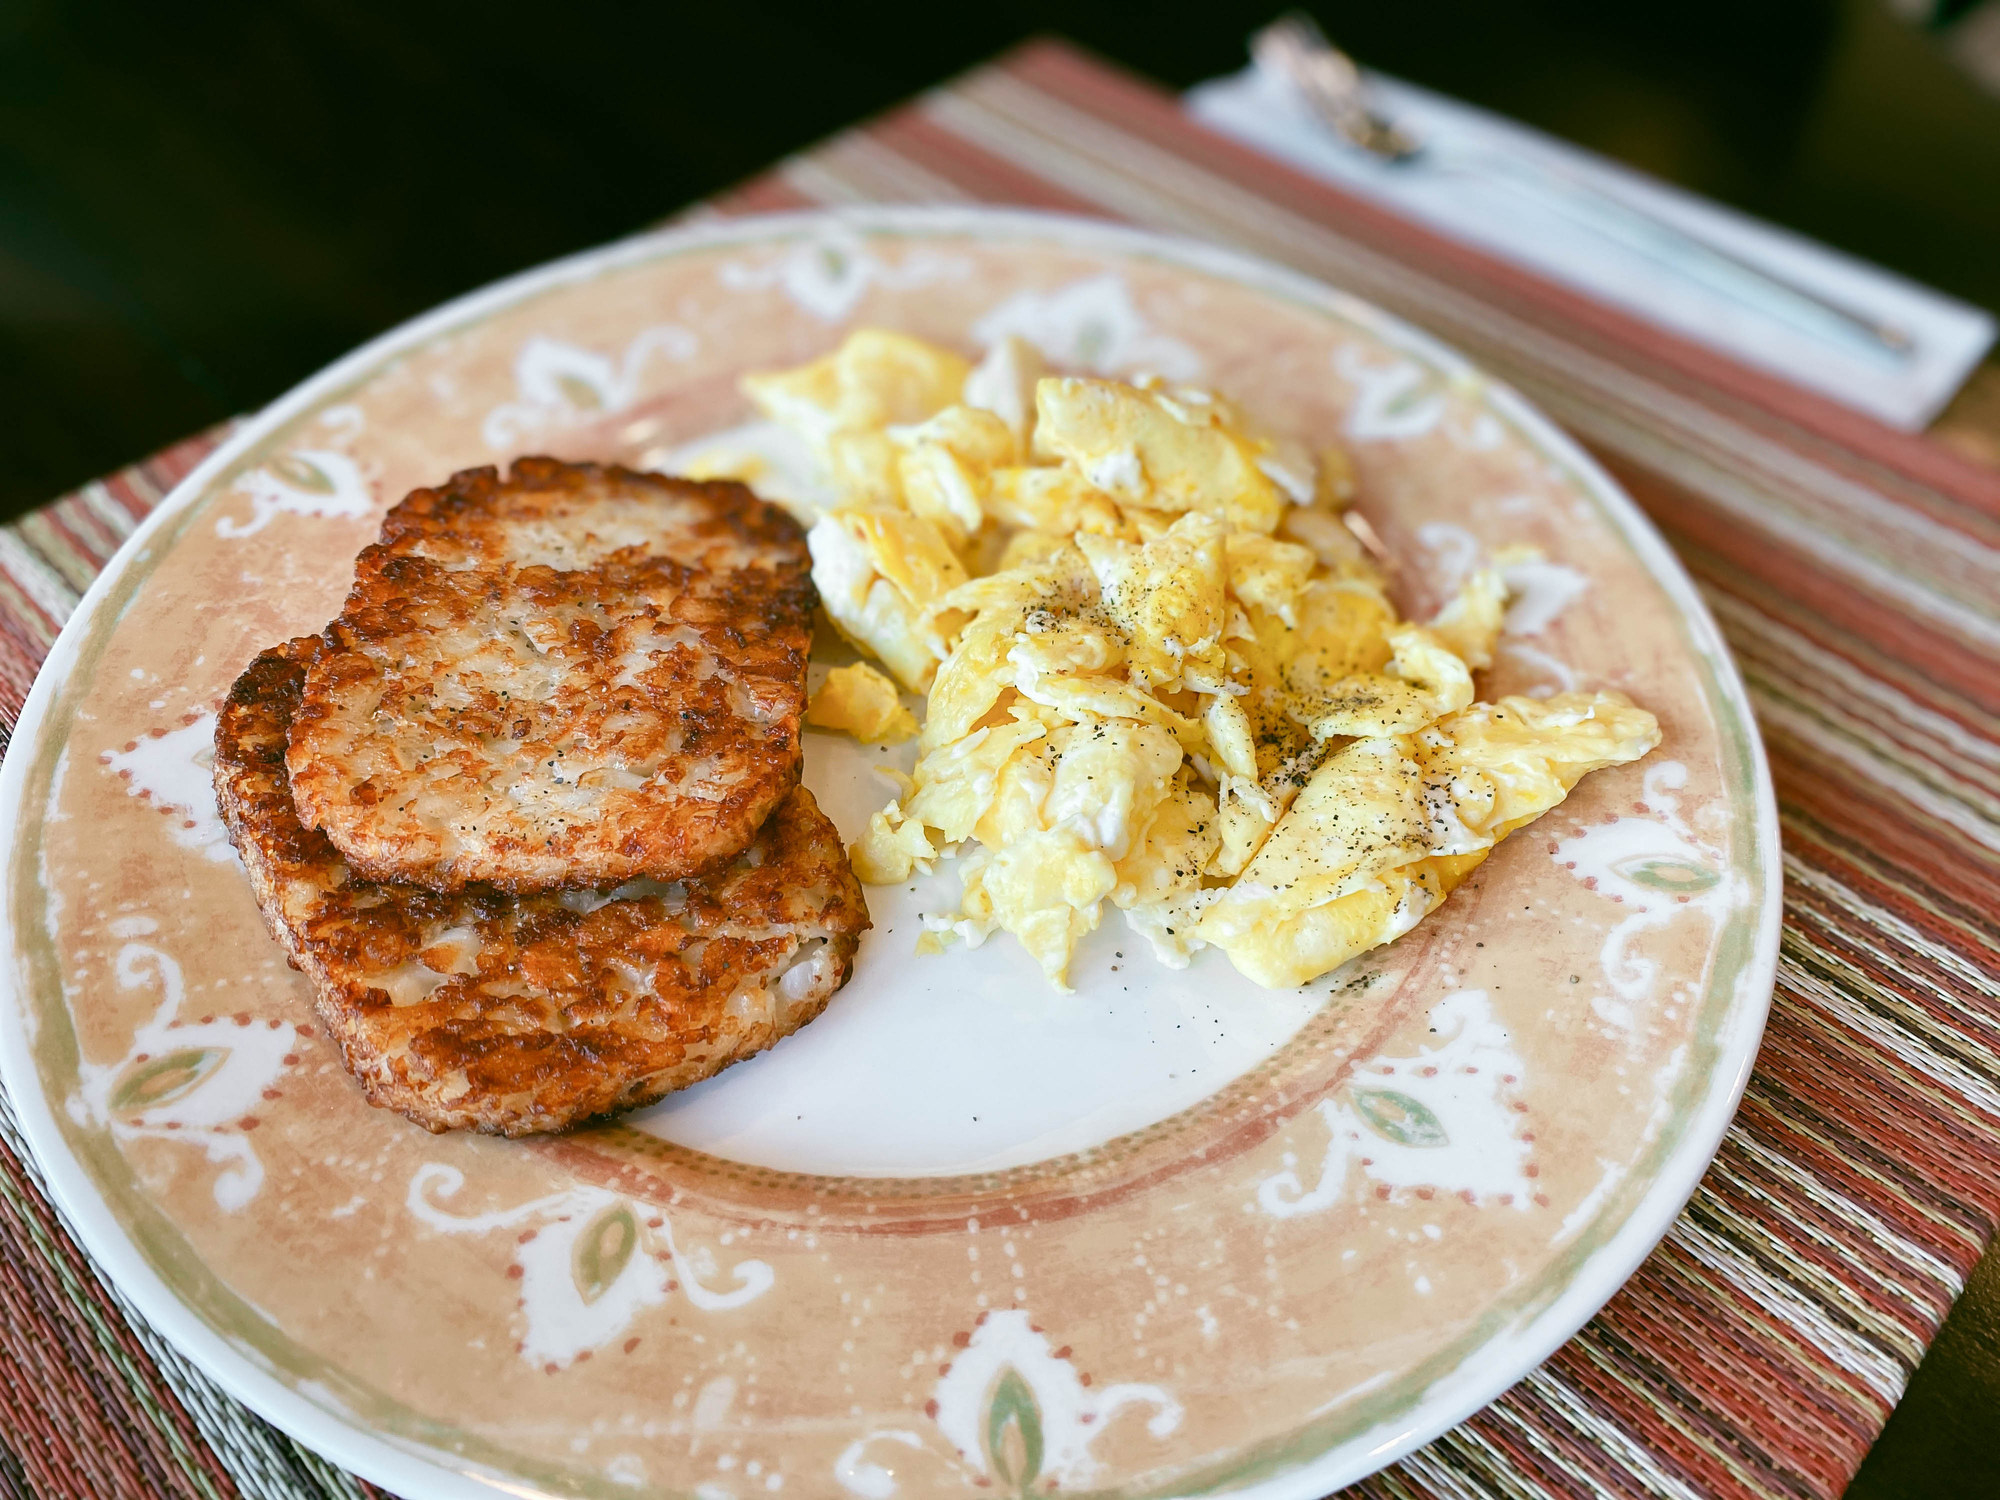 Hash browns and scrambled eggs.